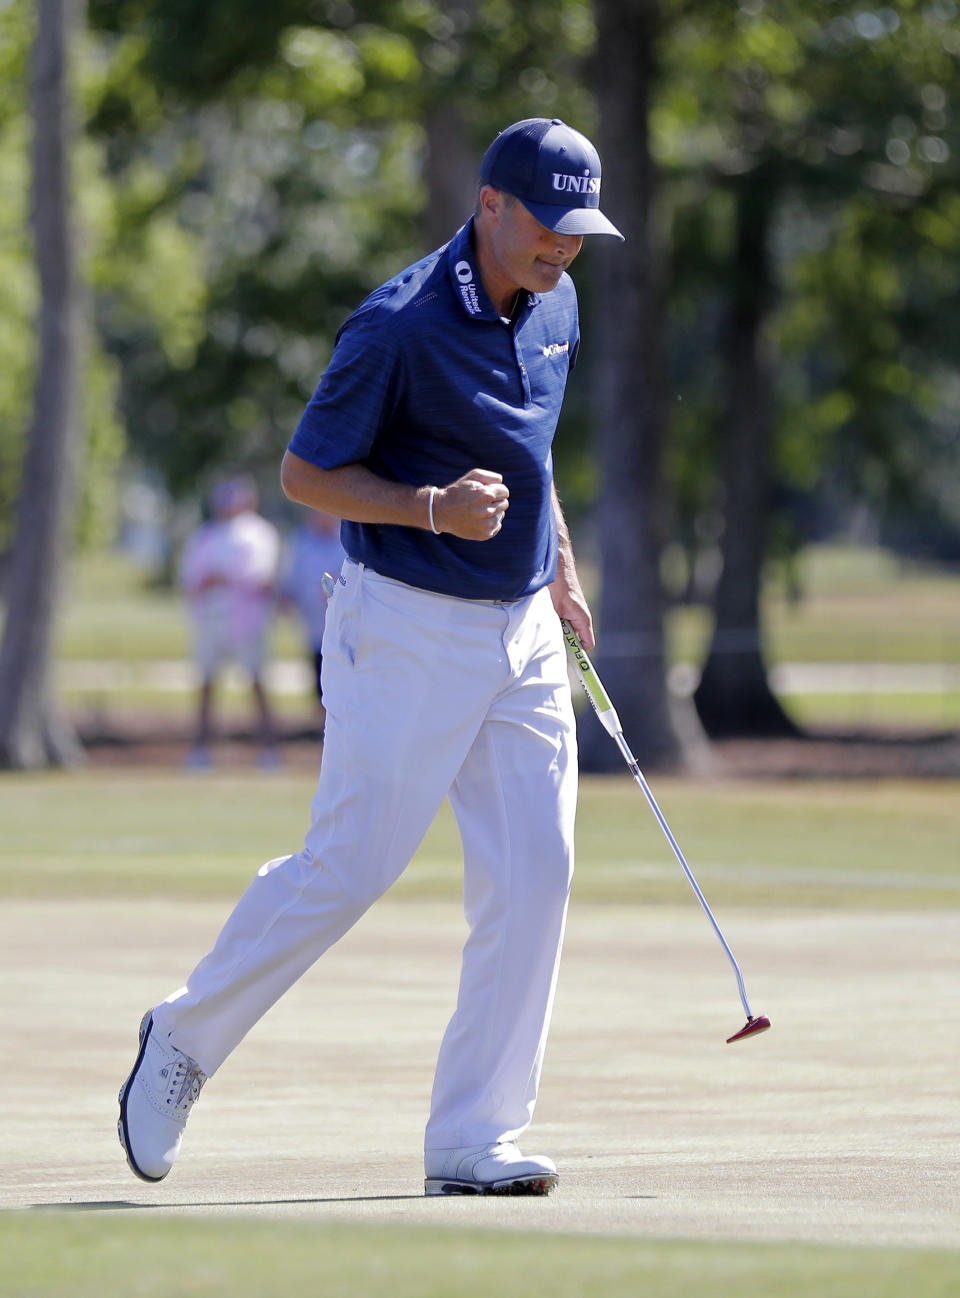 Ryan Palmer pumps his fist after he made a birdie putt on the 14th green during the final round of the PGA Zurich Classic golf tournament at TPC Louisiana in Avondale, La., Sunday, April 28, 2019. Palmer and teammate Jon Rahm won the tournament. (AP Photo/Gerald Herbert)